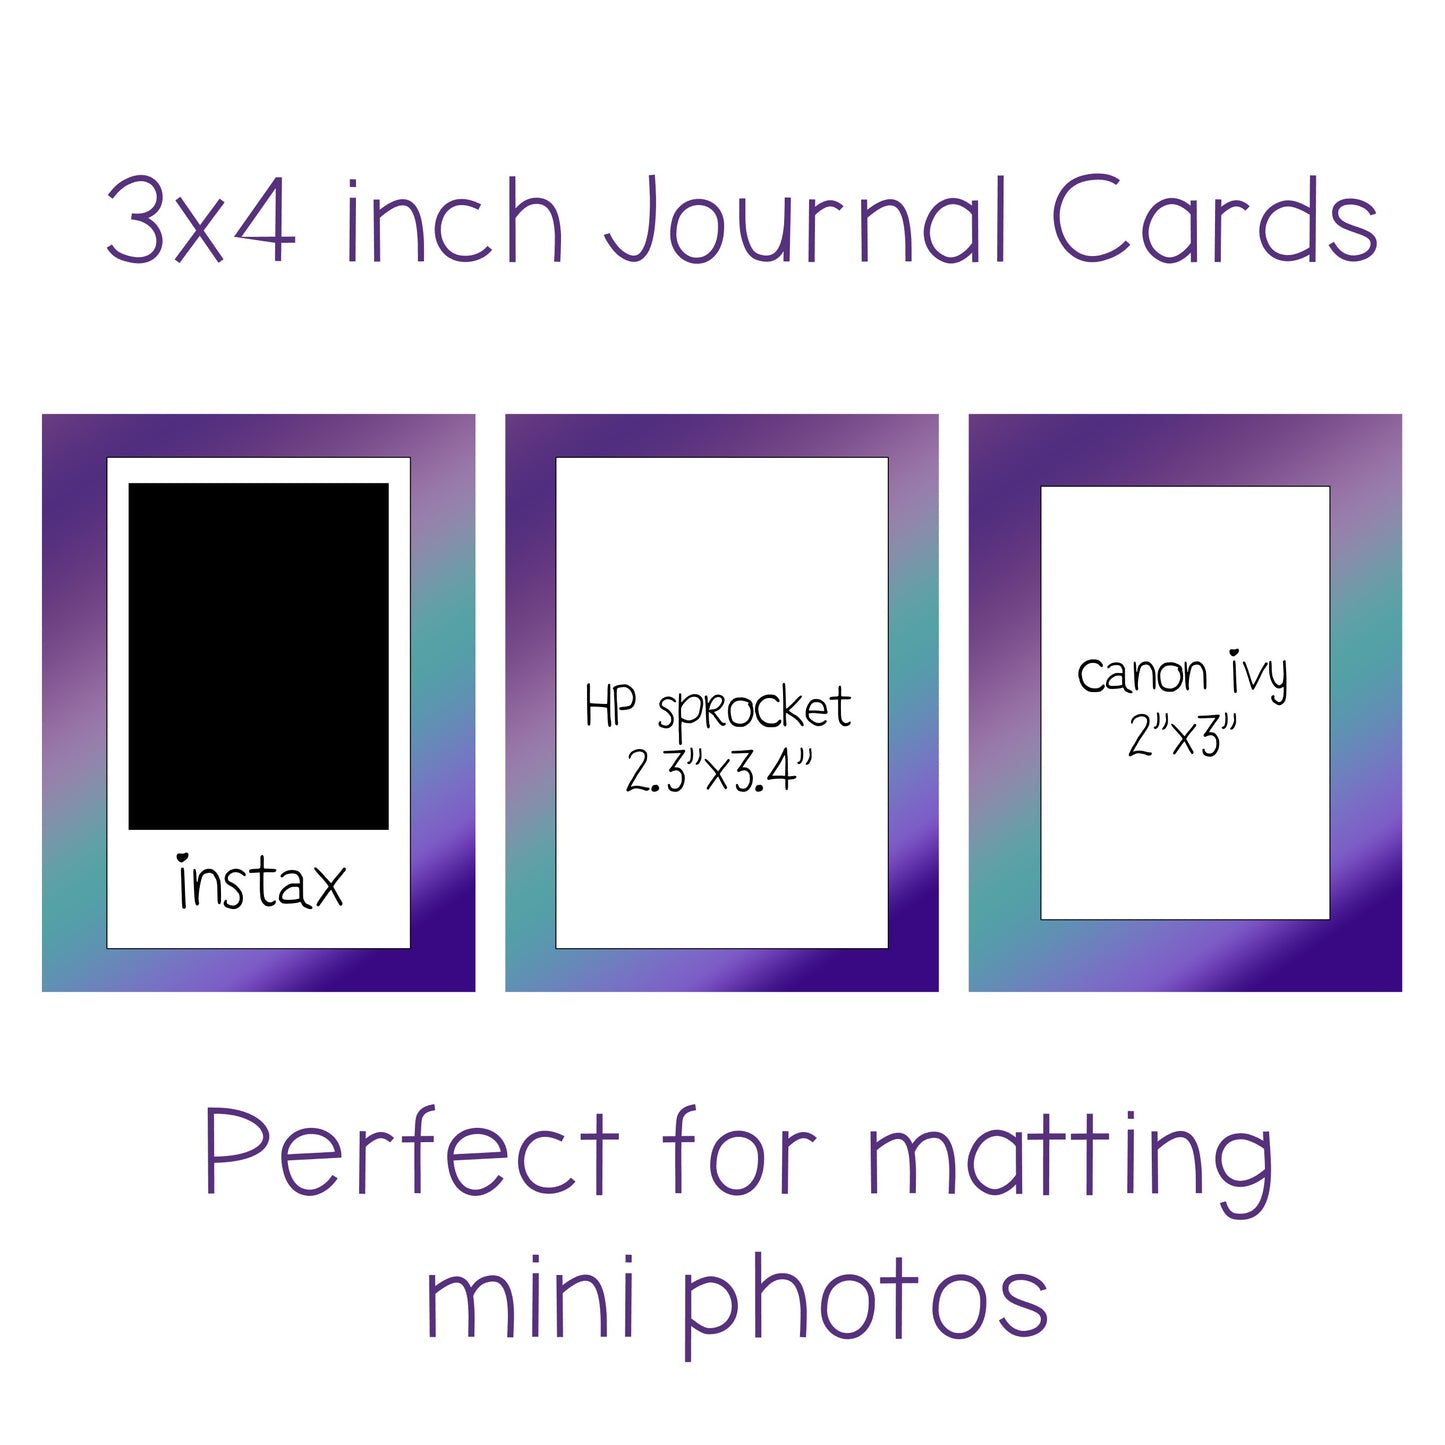 13 3x4 inch Journal Cards |Set 3|